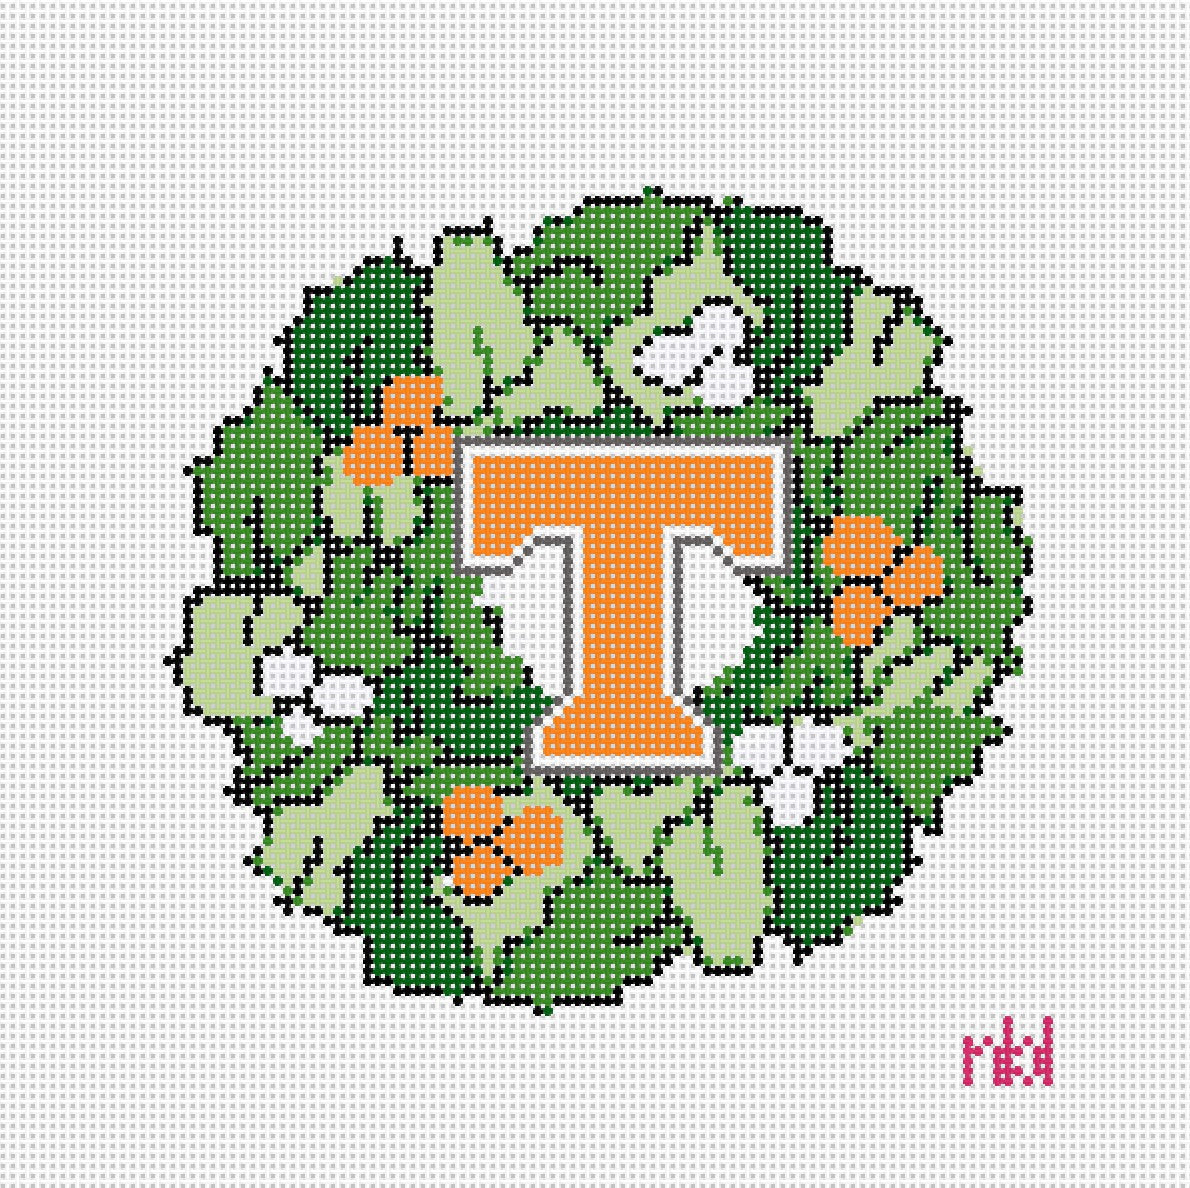 Tennessee Wreath - Needlepoint by Laura